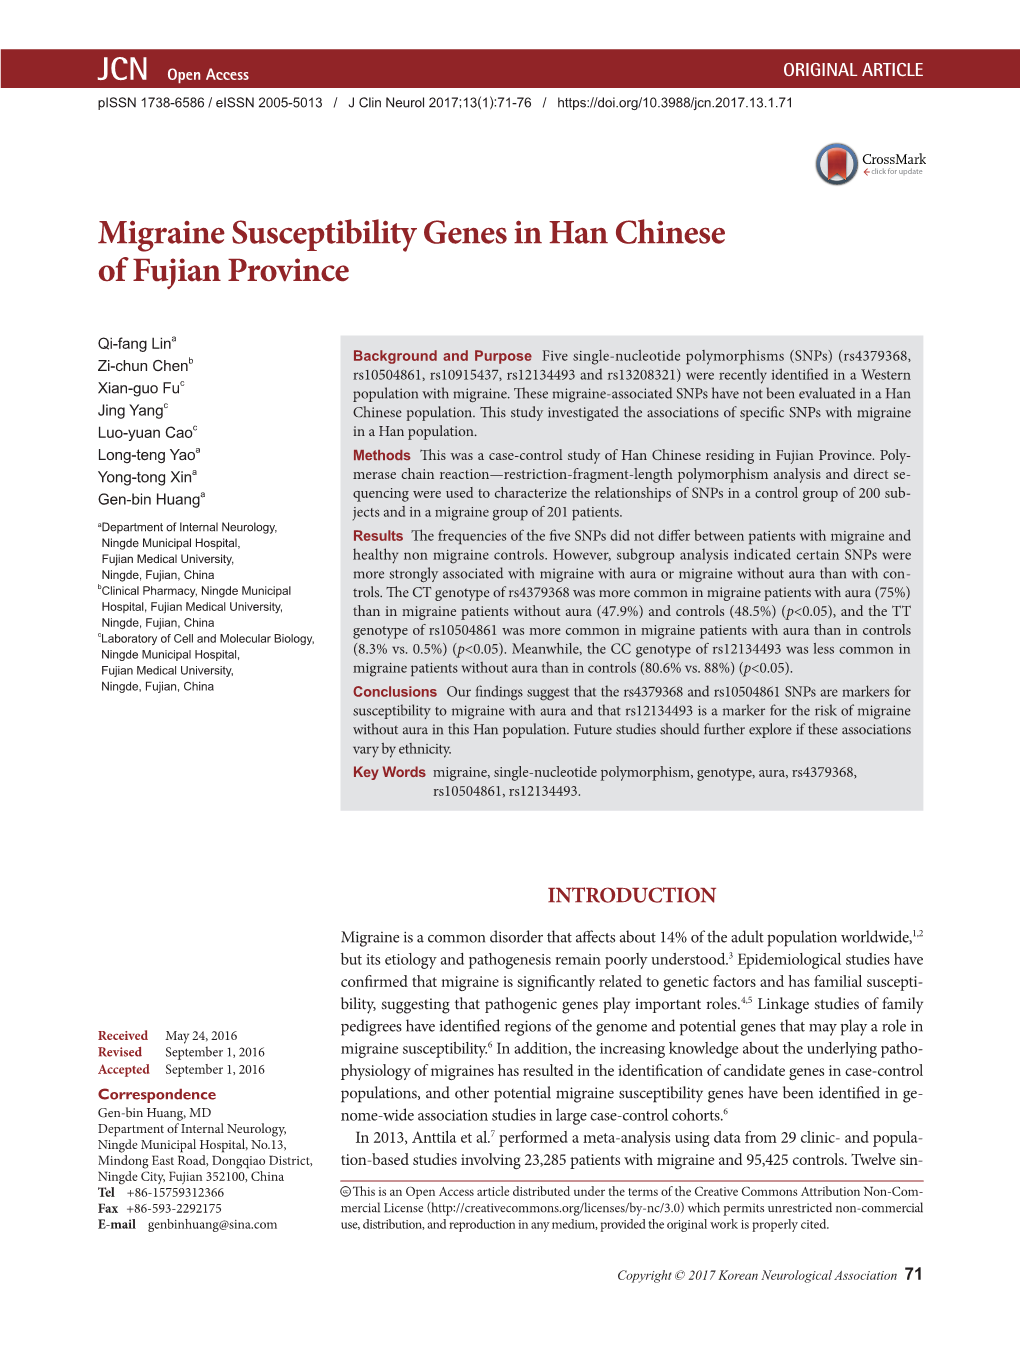 Migraine Susceptibility Genes in Han Chinese of Fujian Province